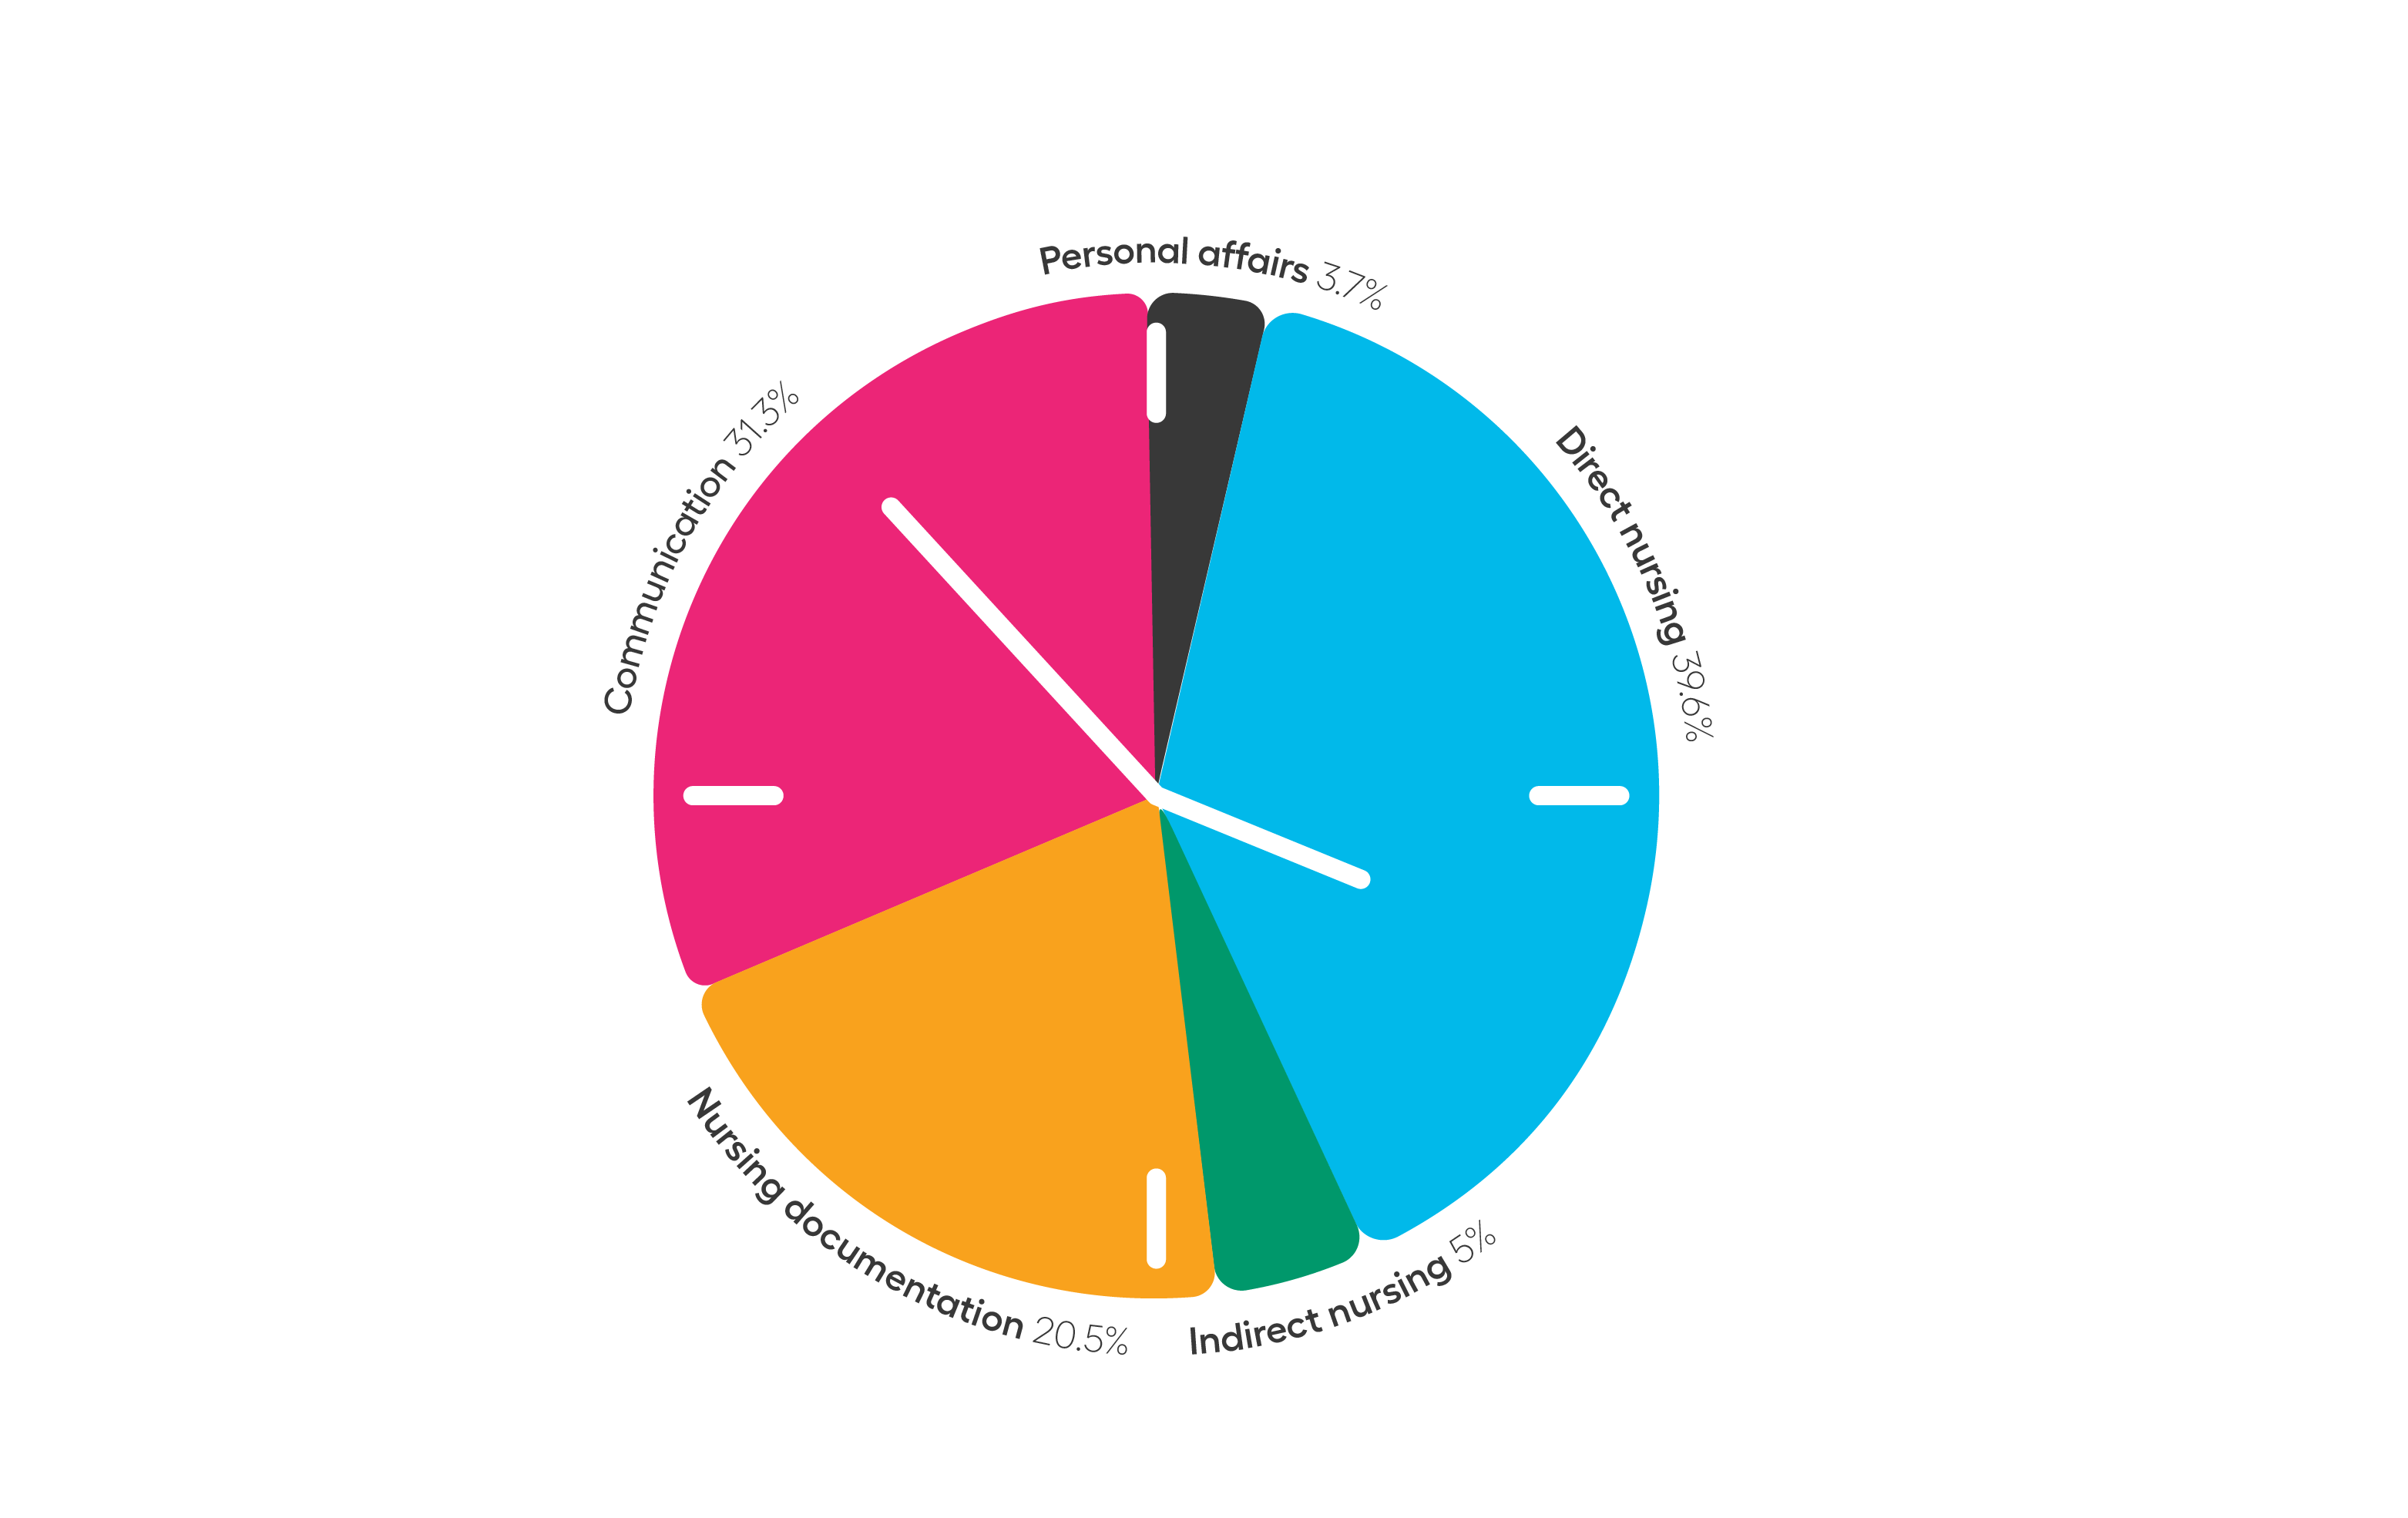 A pie chart designed to look like a clock face, showing nurses' time break up across the five categories of direct care, indirect care, documentation, communication, and personal affairs.